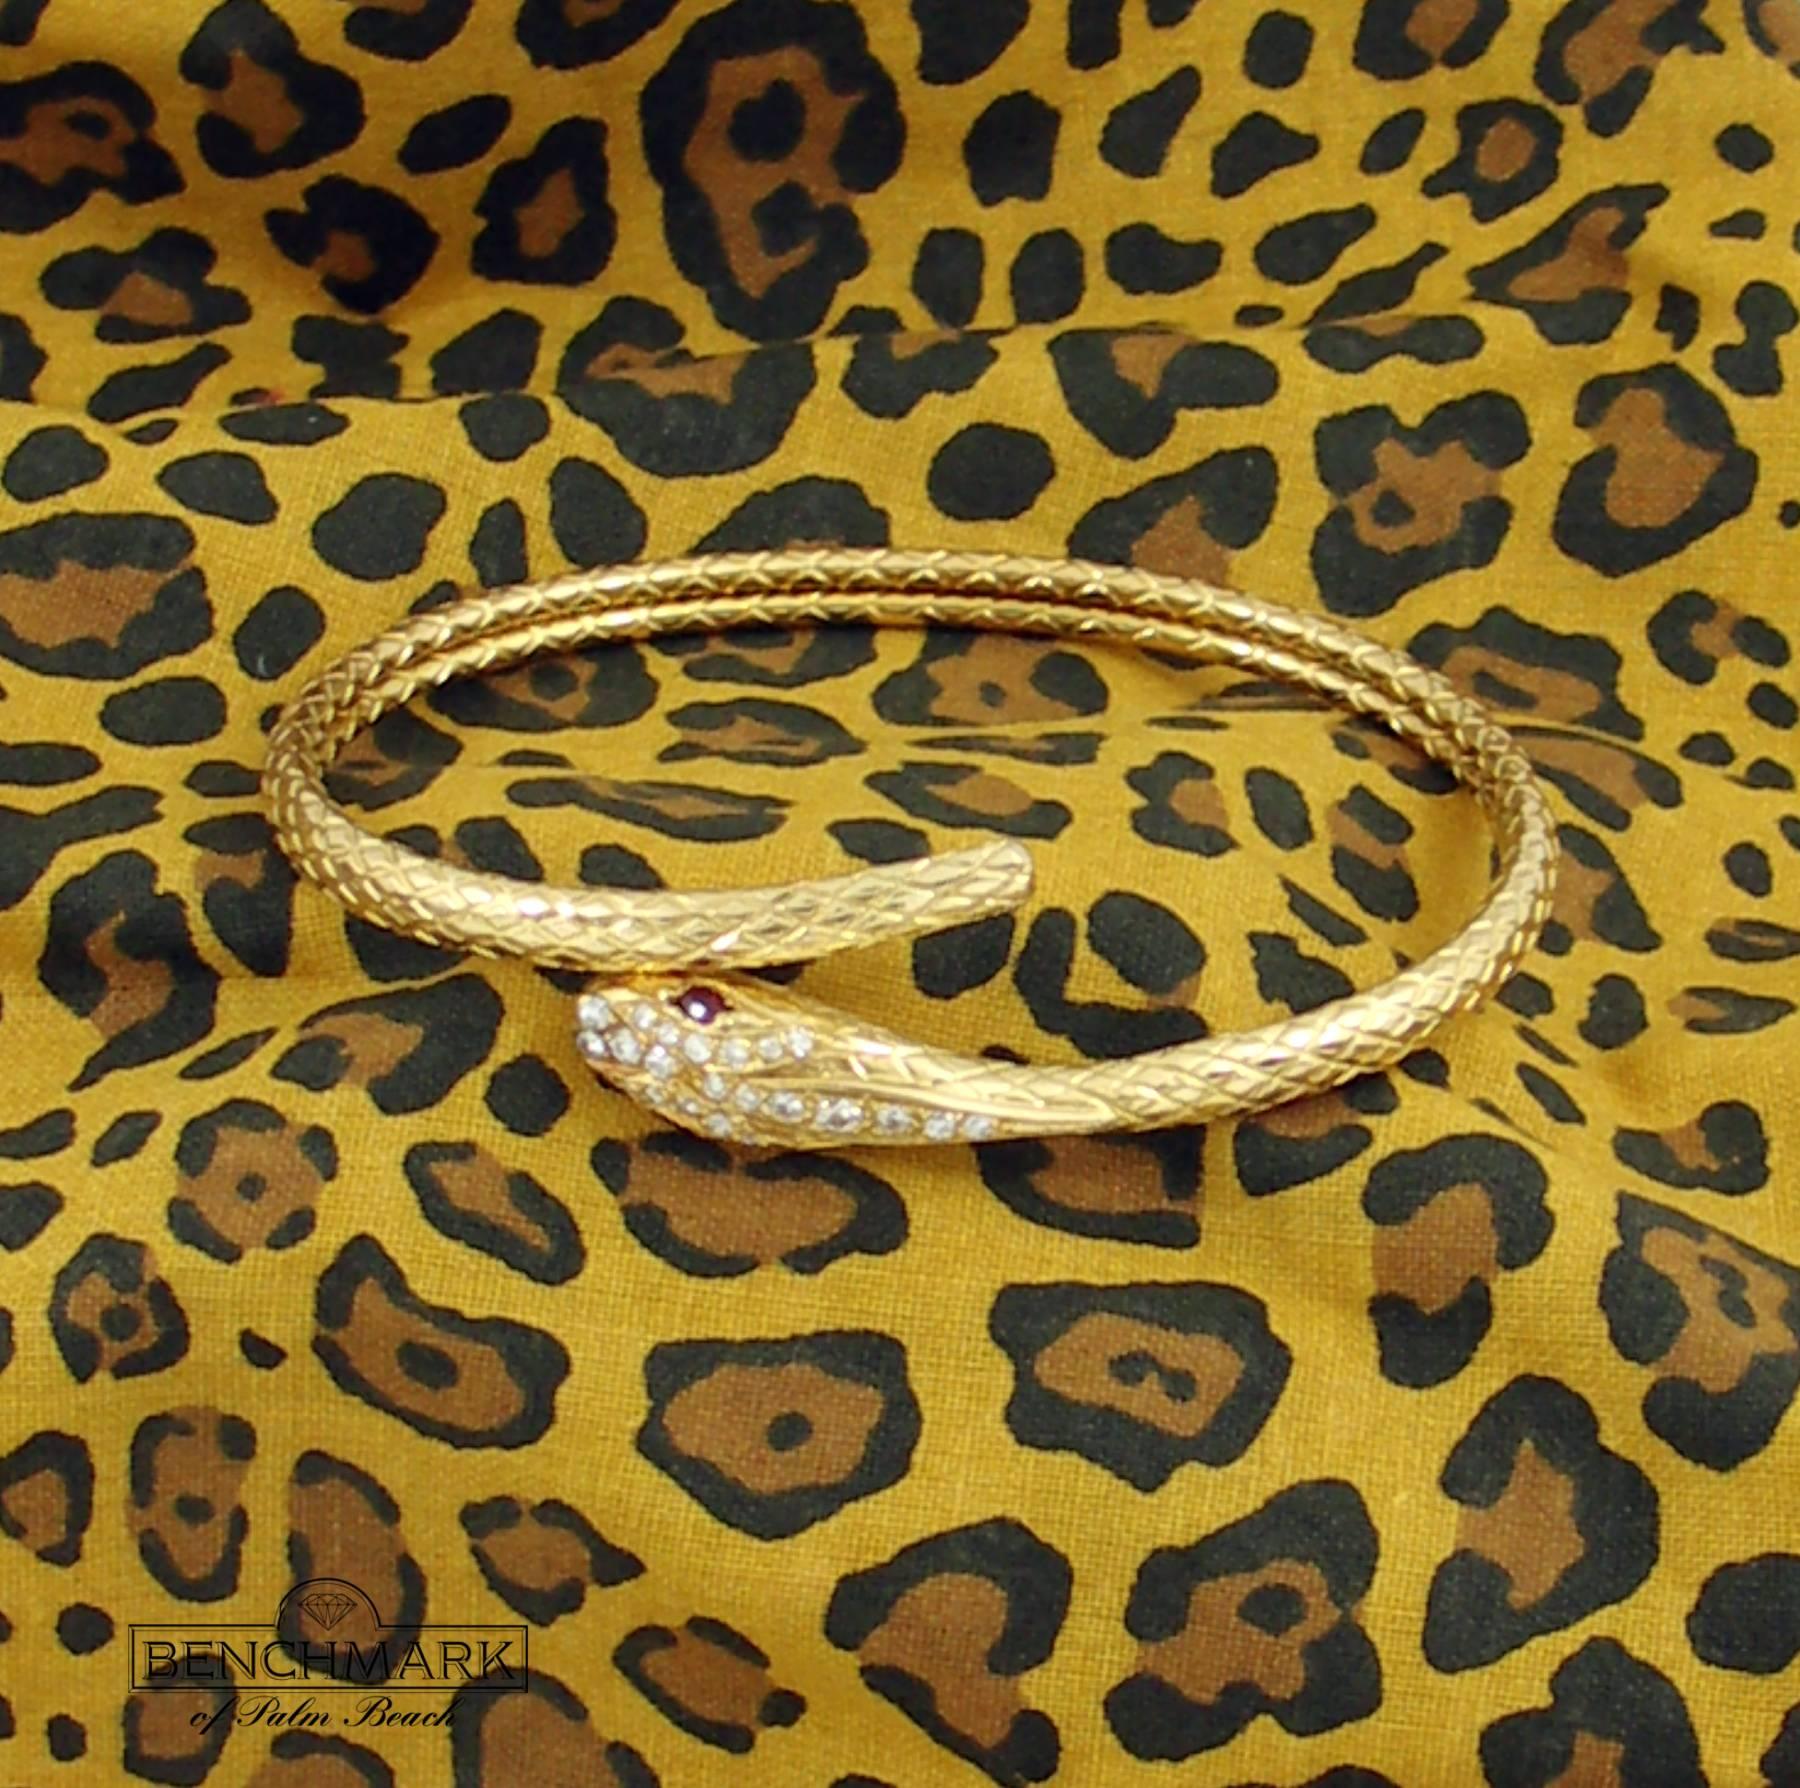 An 18K yellow gold, flexible, snake cuff, set with 23 round brilliant cut diamonds weighing 0.35ct total approximate weight, and 2 marquise cut rubies weighing a total of approximately 0.15ct. This sleek serpent measures 3/16 of an inch wide at the